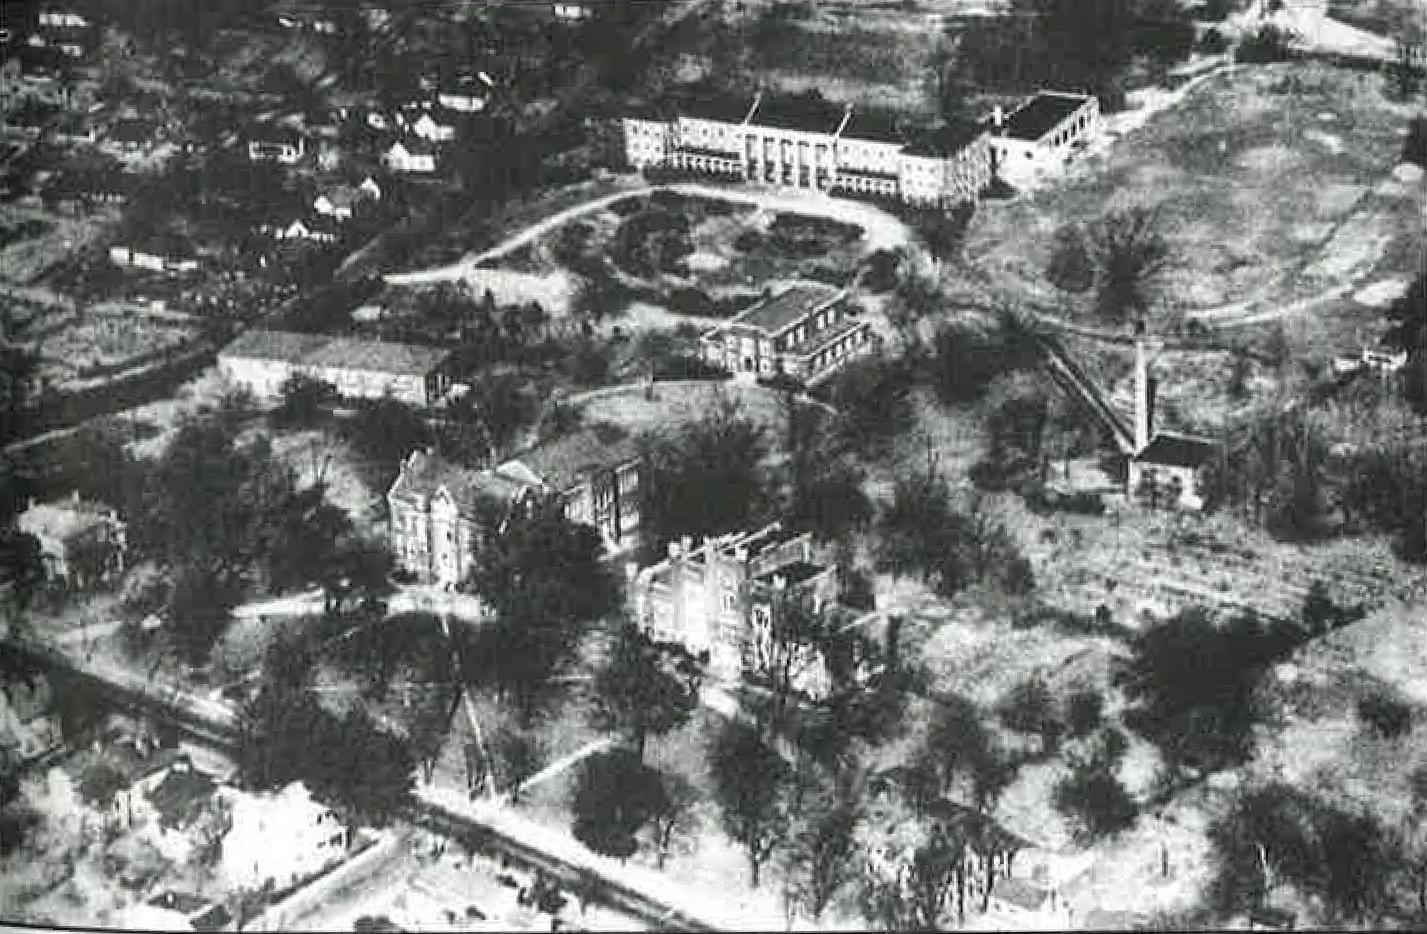 Harned大厅, 图中上部, is the only building still standing from this aerial image circa 1935.